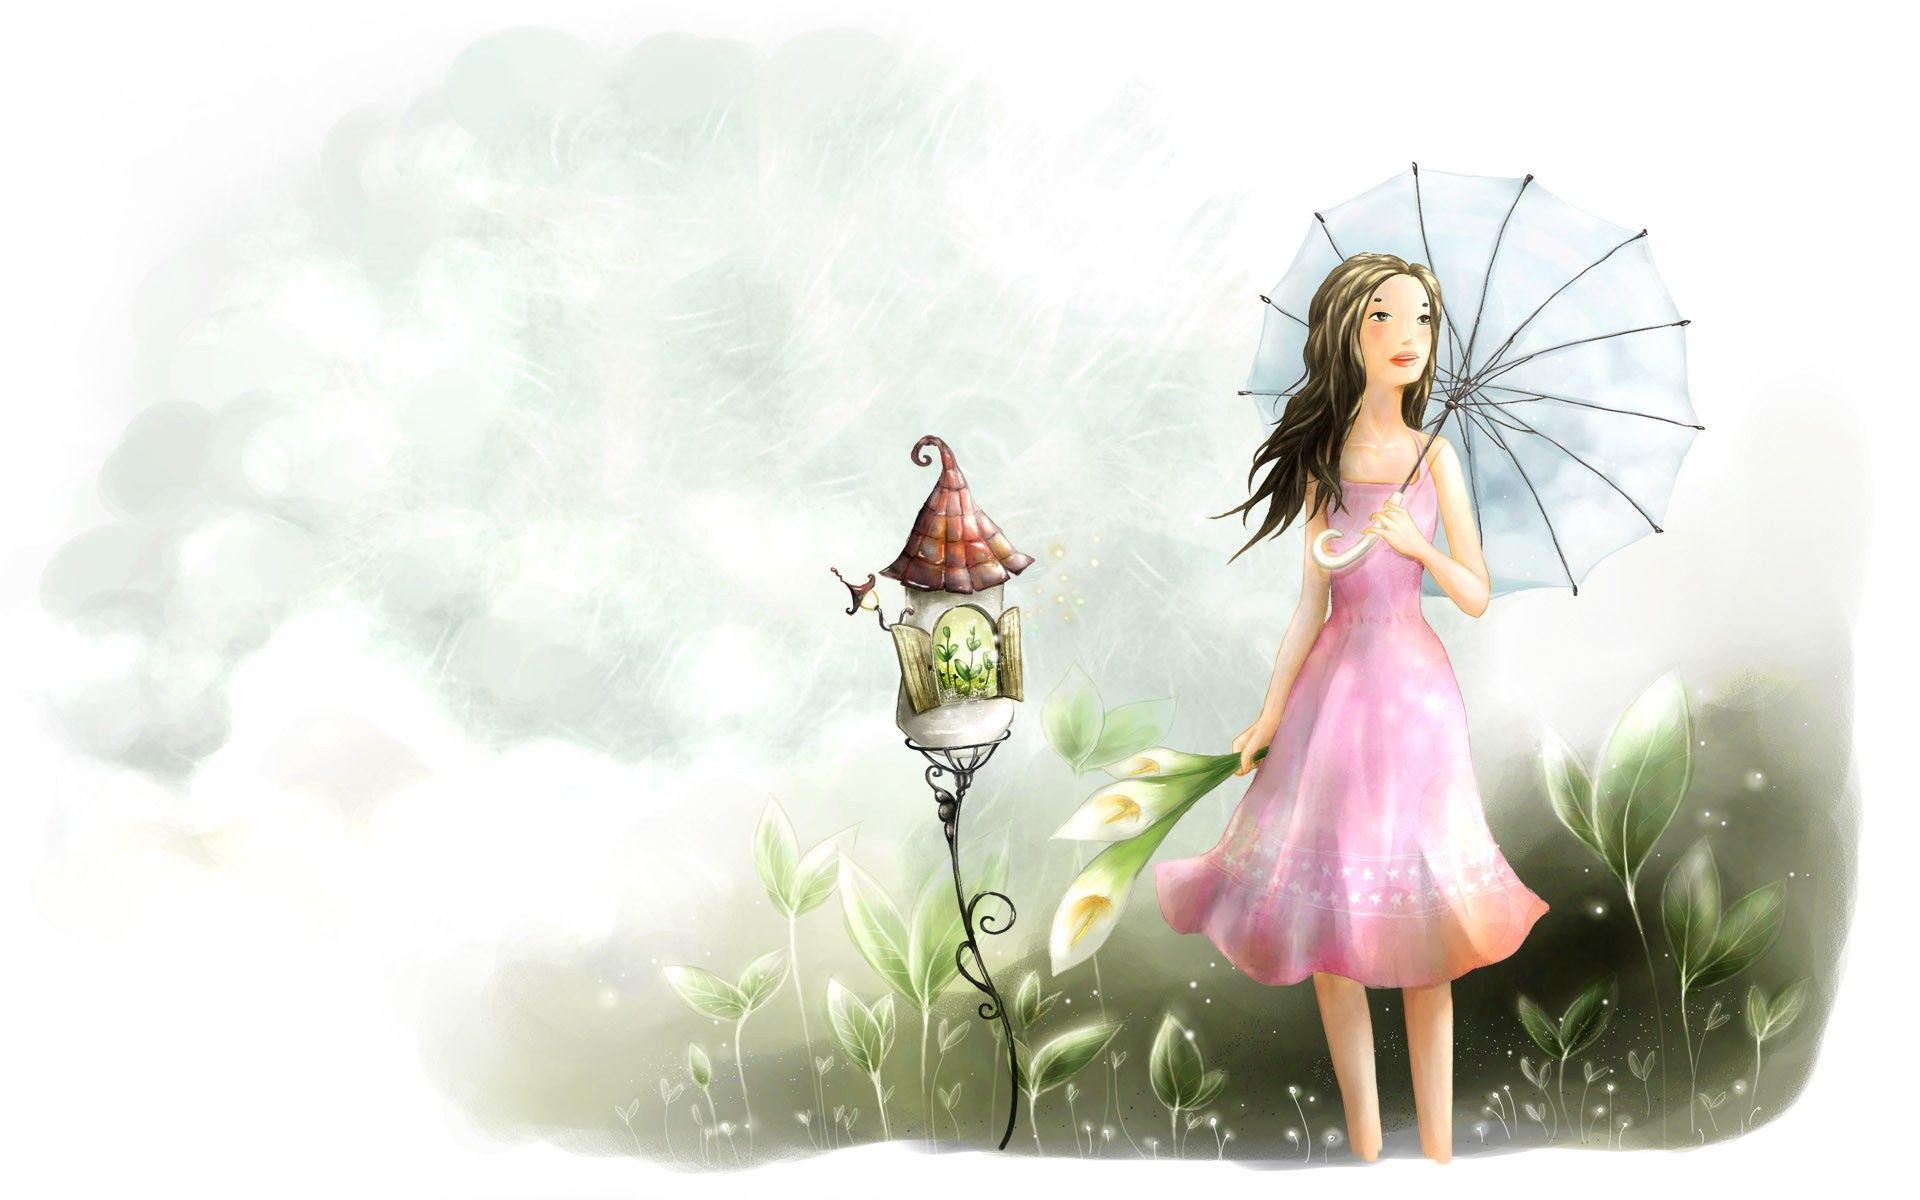 Artistic Cute Wallpapers - Top Free Artistic Cute Backgrounds ...